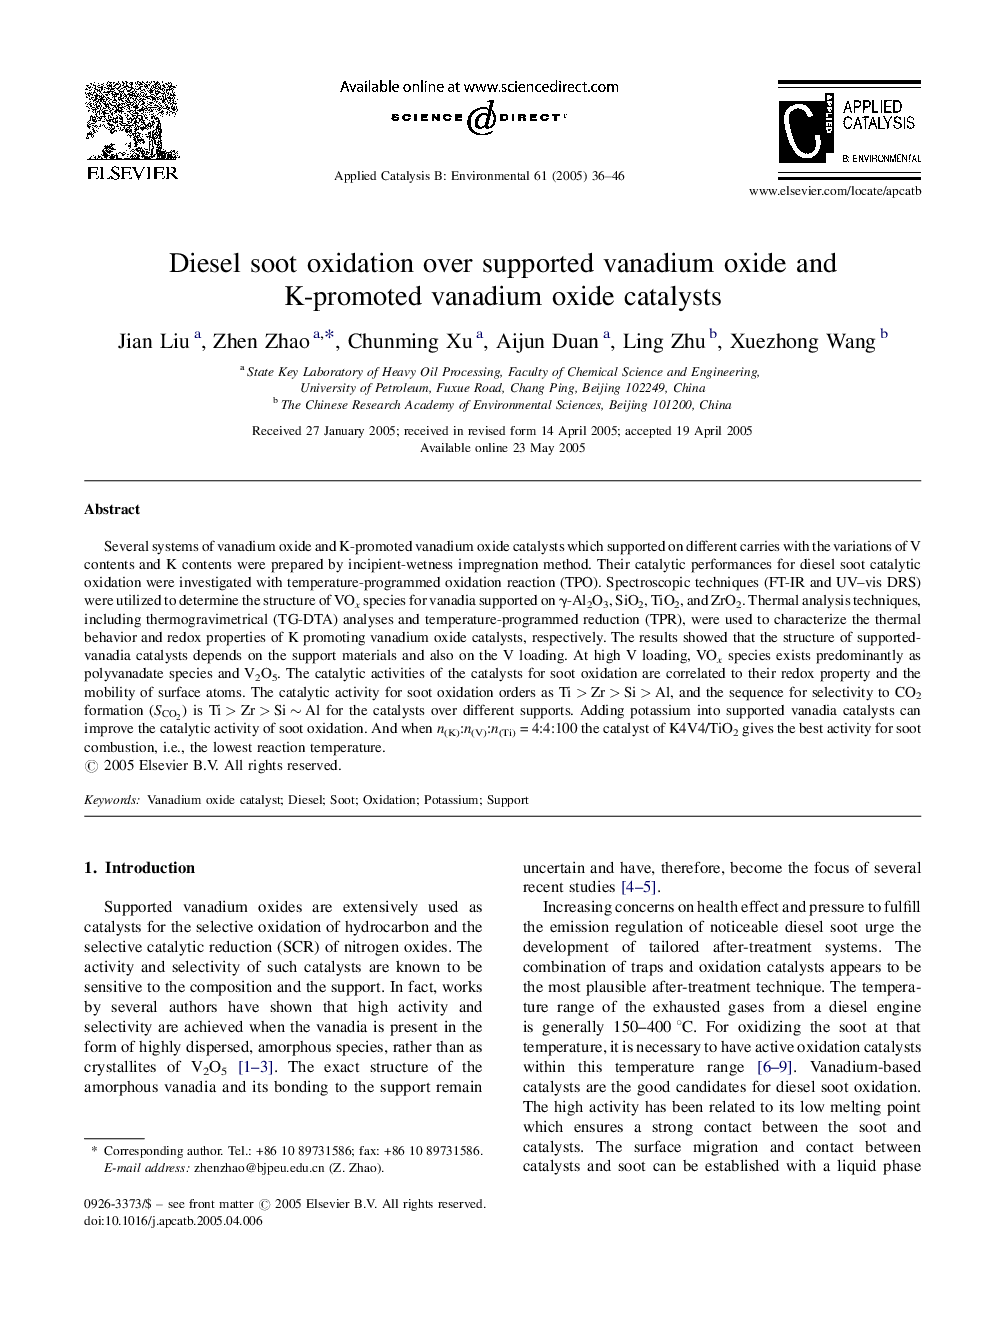 Diesel soot oxidation over supported vanadium oxide and K-promoted vanadium oxide catalysts